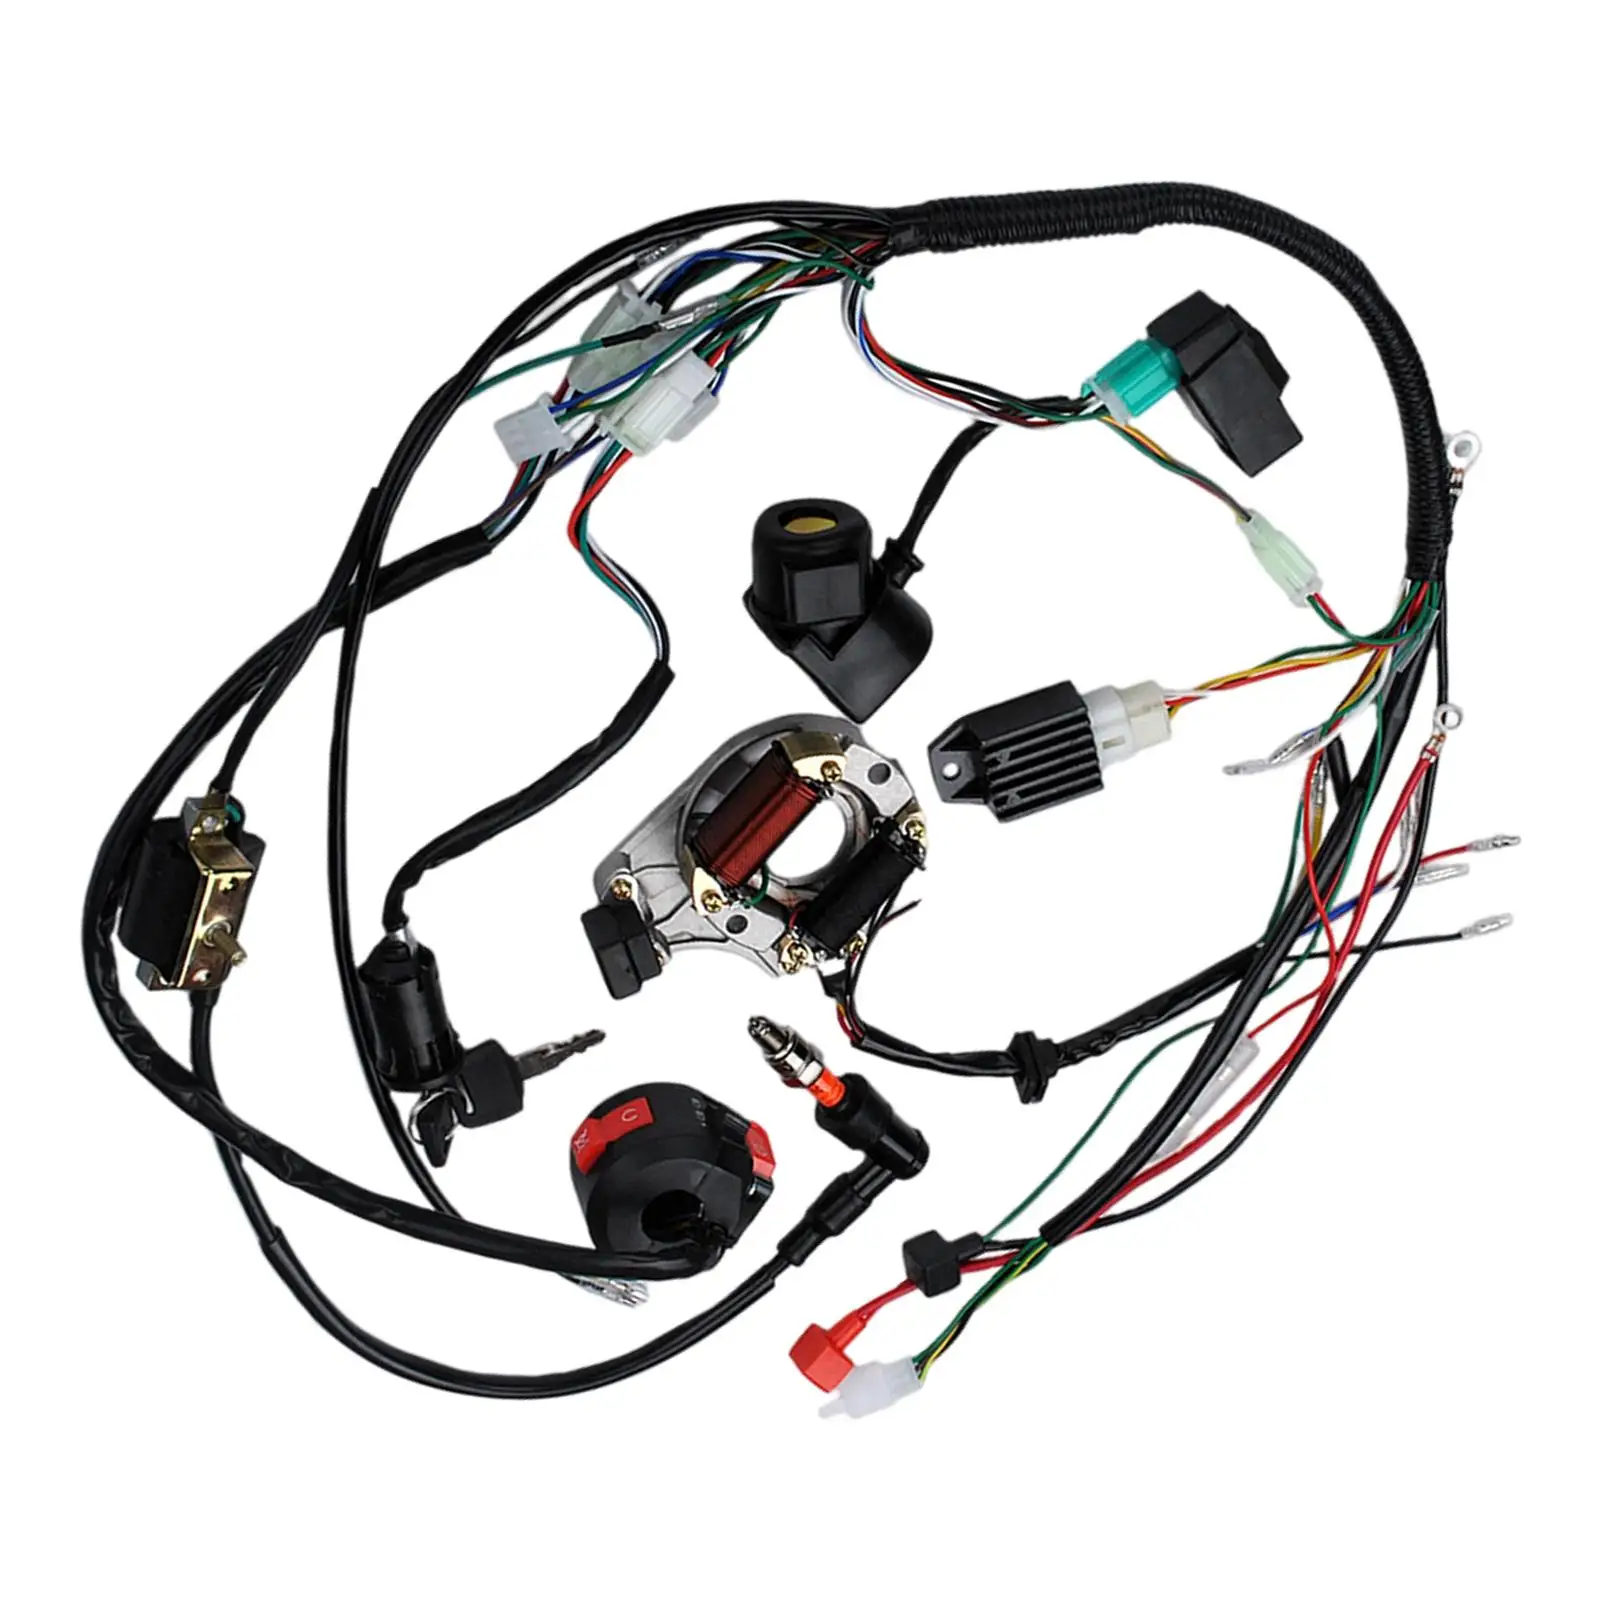 1Set Full  Electrics Wiring Harness Stator w/ Solenoid Relay Cdi Spark  for Motorcycle  ATV Buggy 50cc -125cc